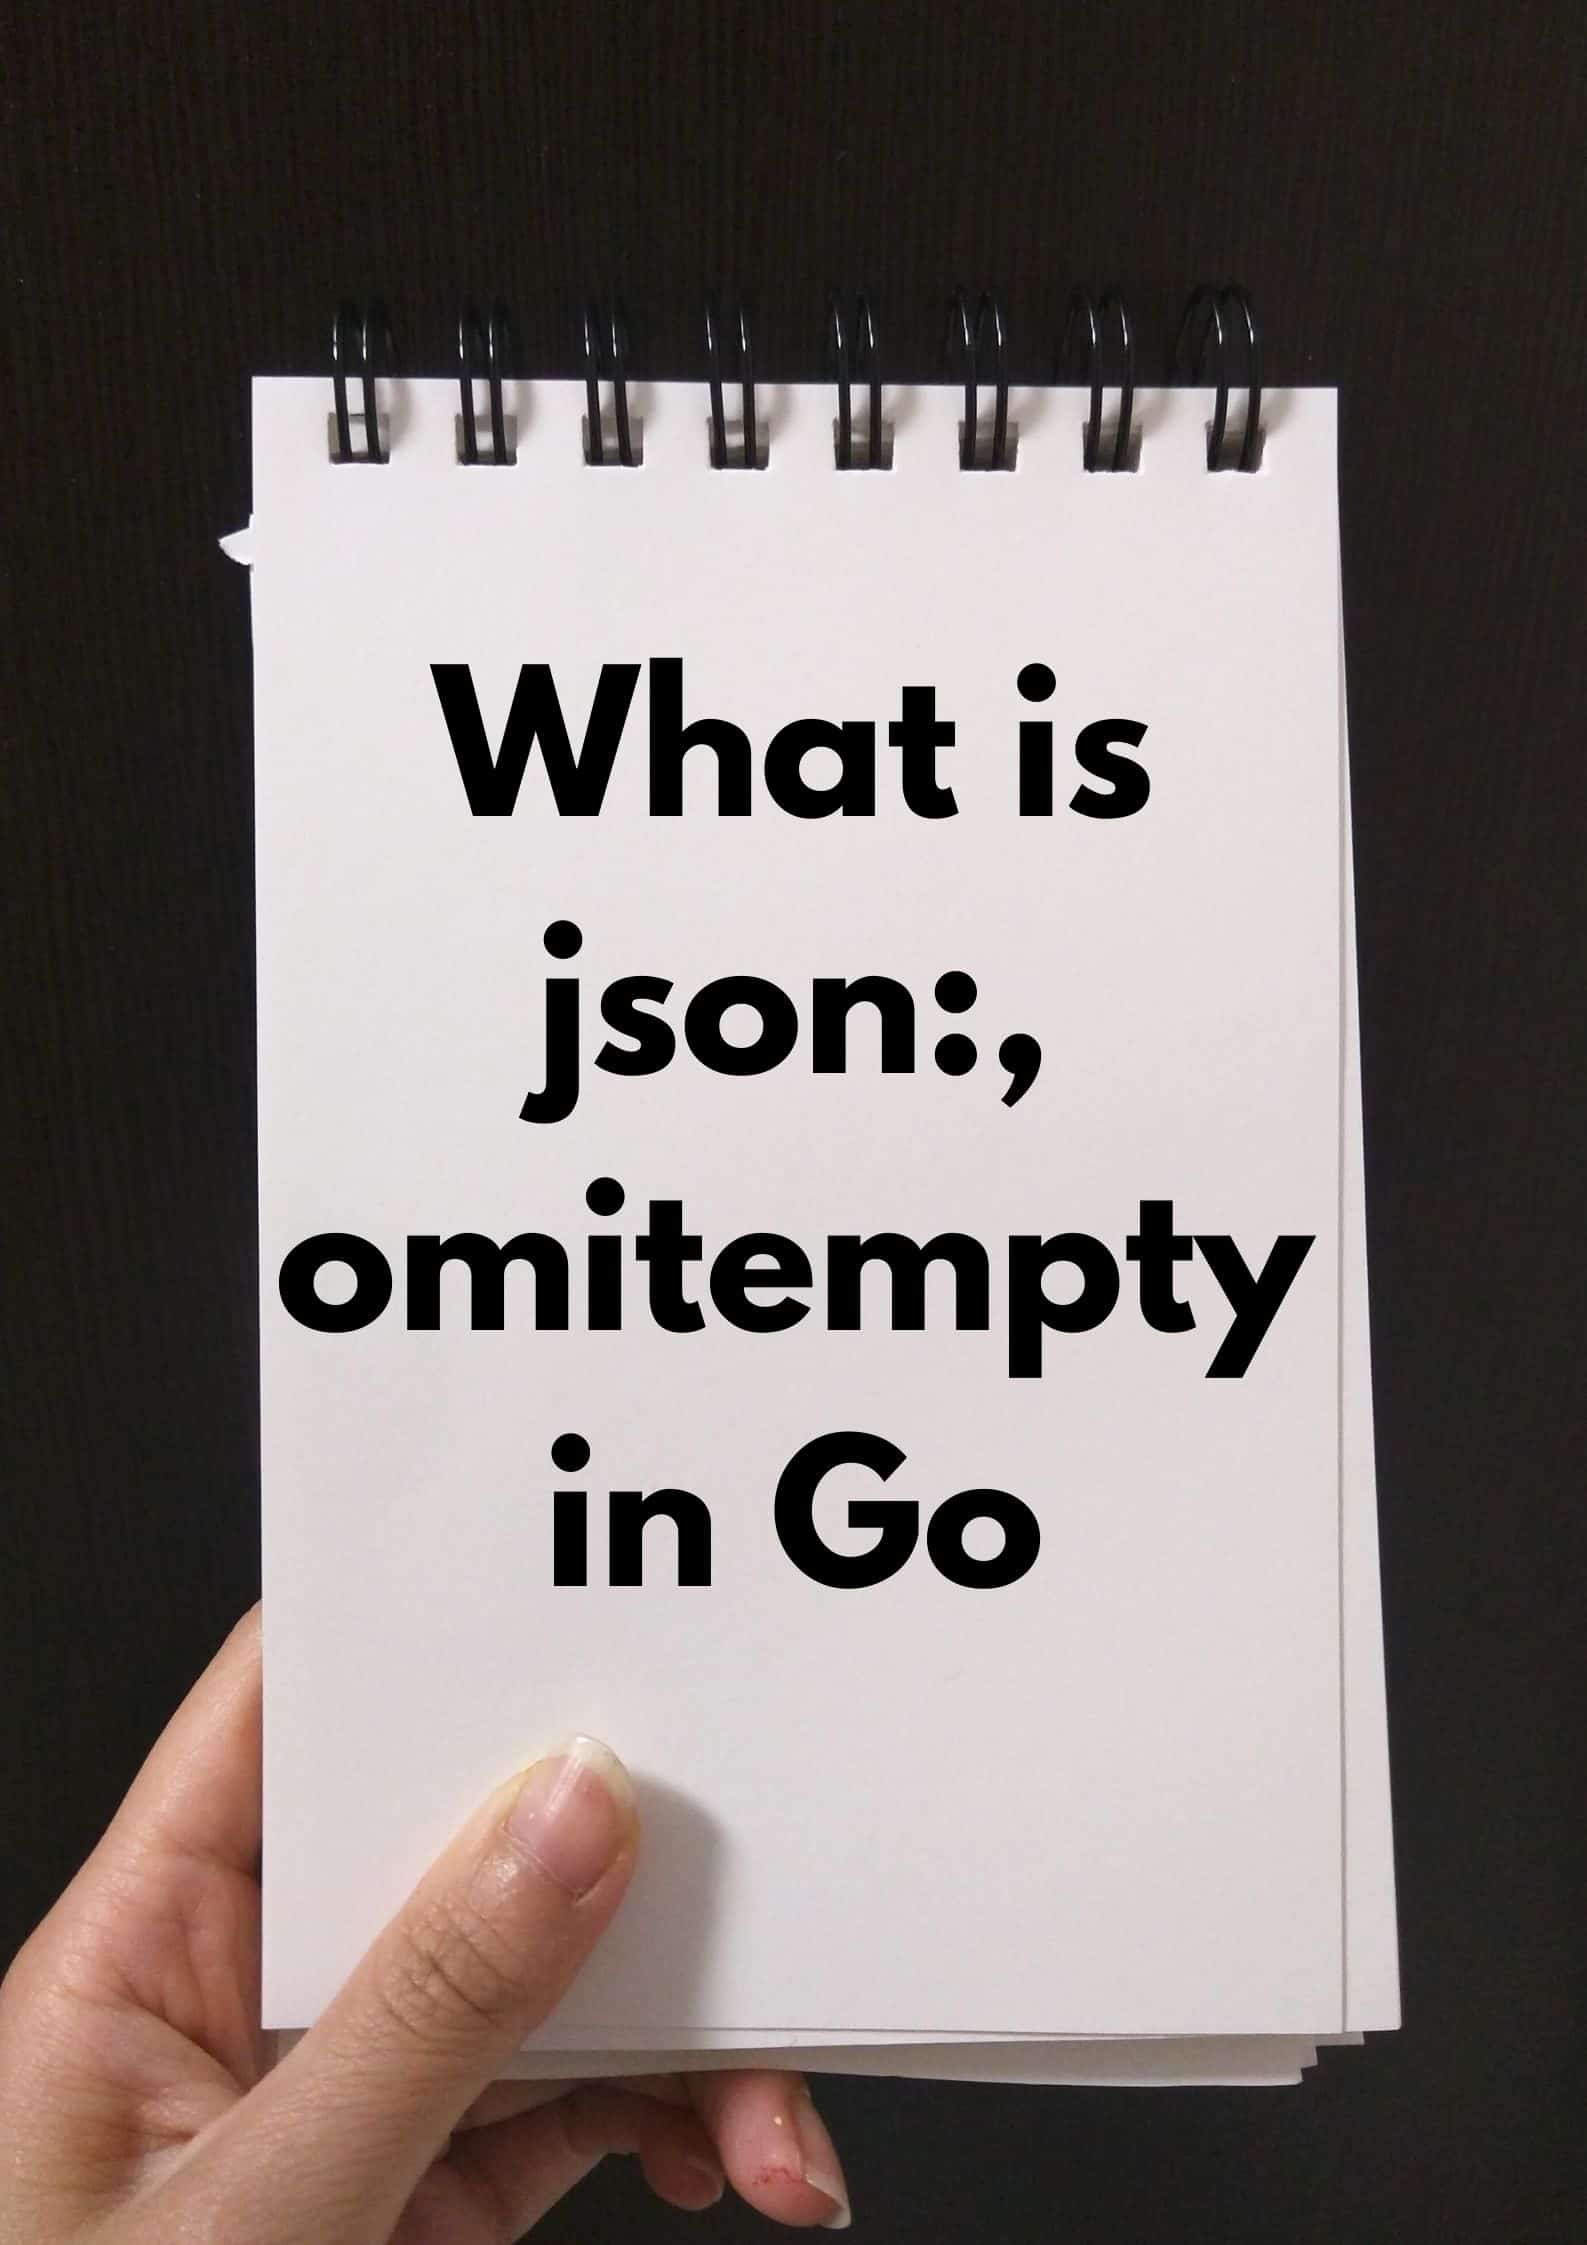 What Is json:,omitempty In Go?